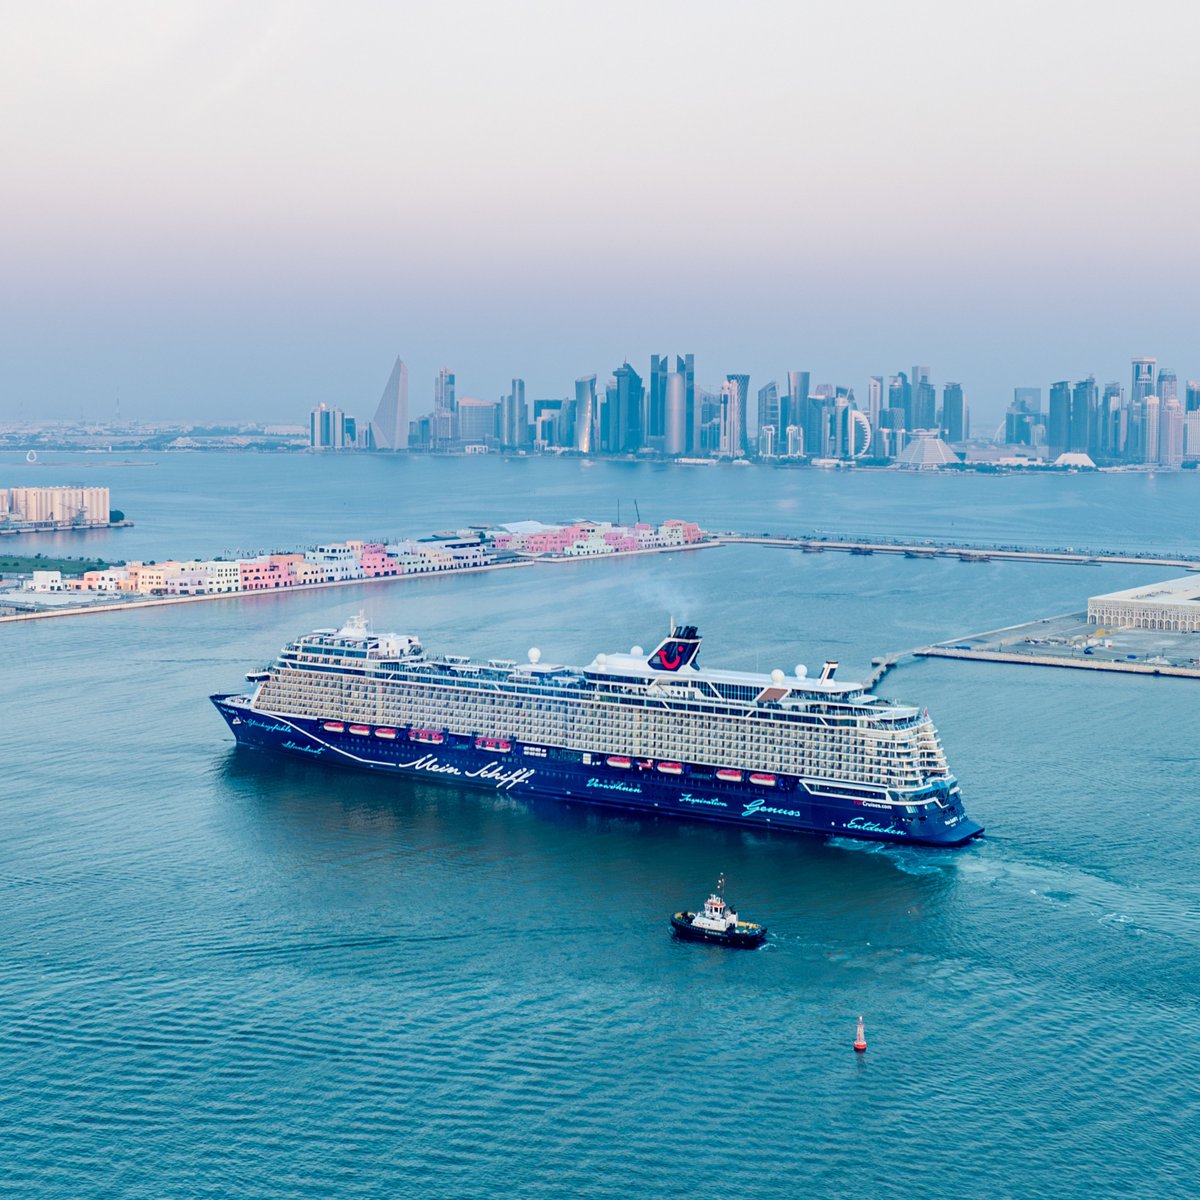 Every cruise season, the Grand Cruise Terminal at #OldDohaPort welcomes magnificent megaships from leading international cruise lines. 

Take a look at the #MeinSchiff 2, during its inaugural voyage to Qatar in 2023—a sight to behold!

#QatarBoatShow2024 #QatarBoatShow